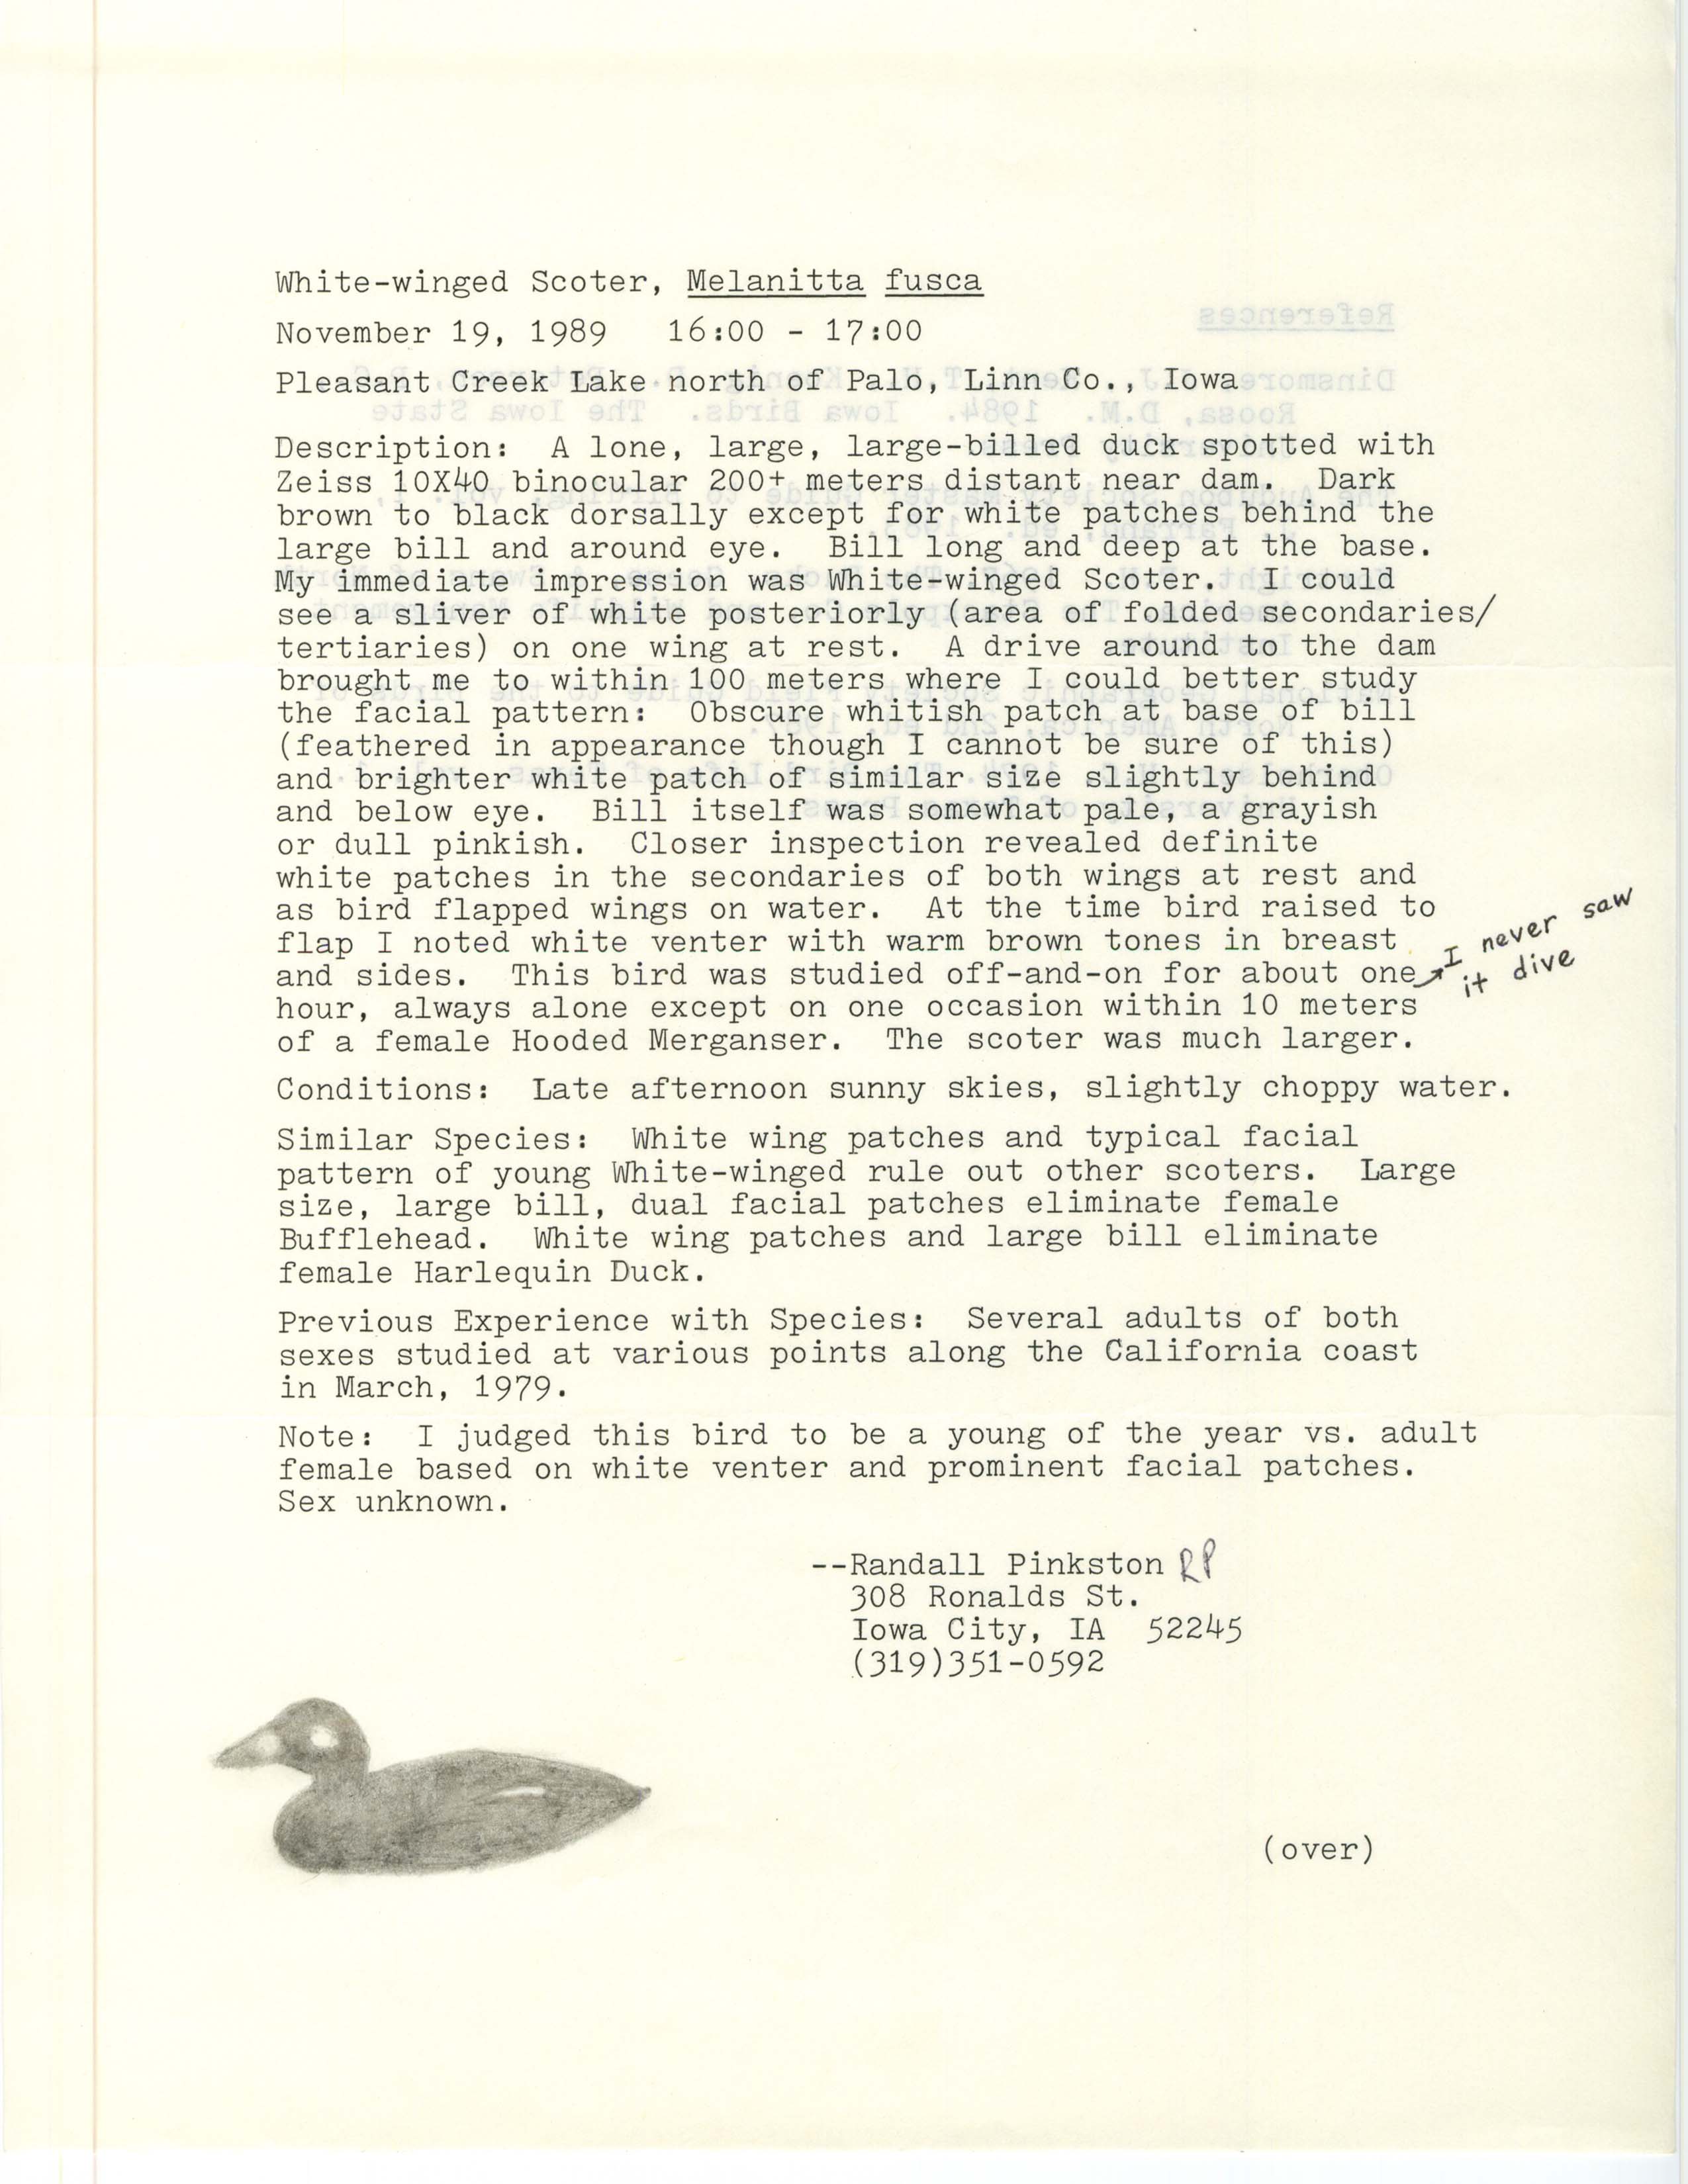 Rare bird documentation form for White-winged Scoter at Pleasant Creek Lake, 1989